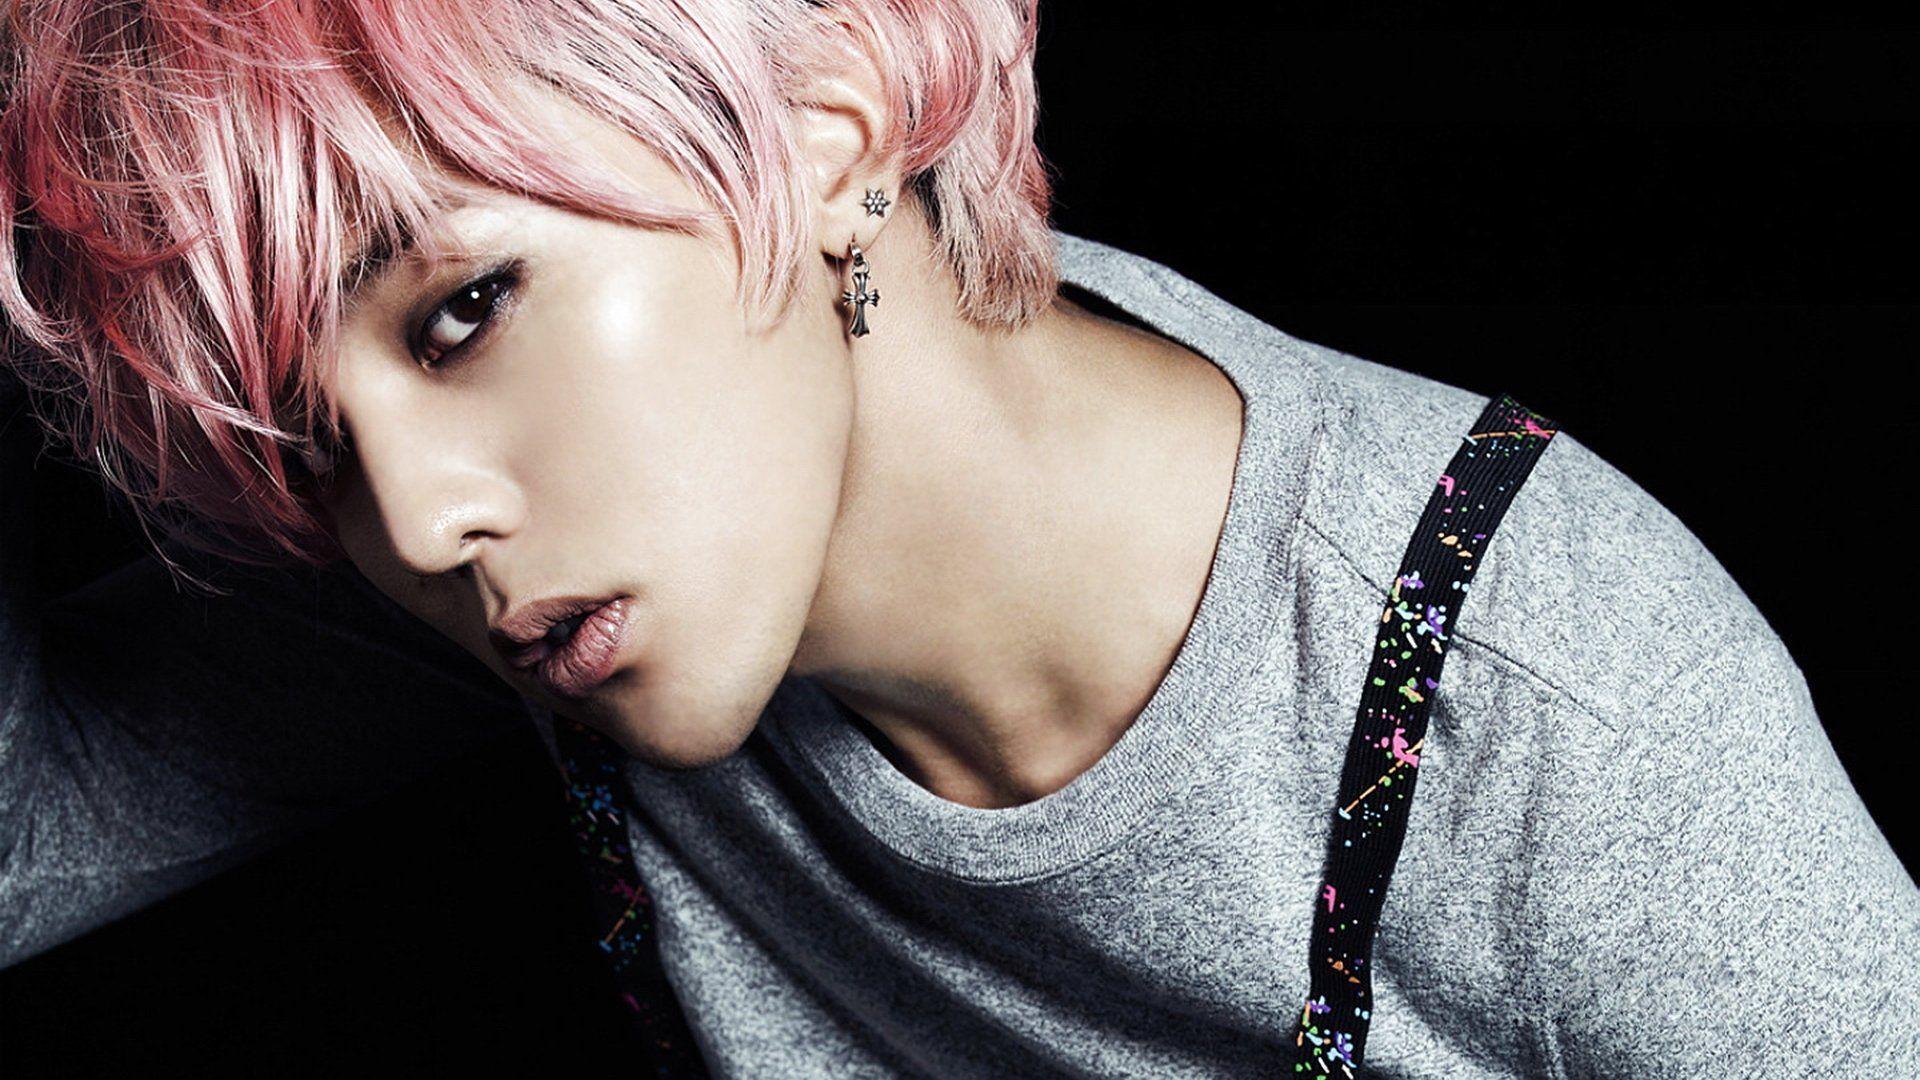 Gdragon Wallpapers Wallpaper Cave